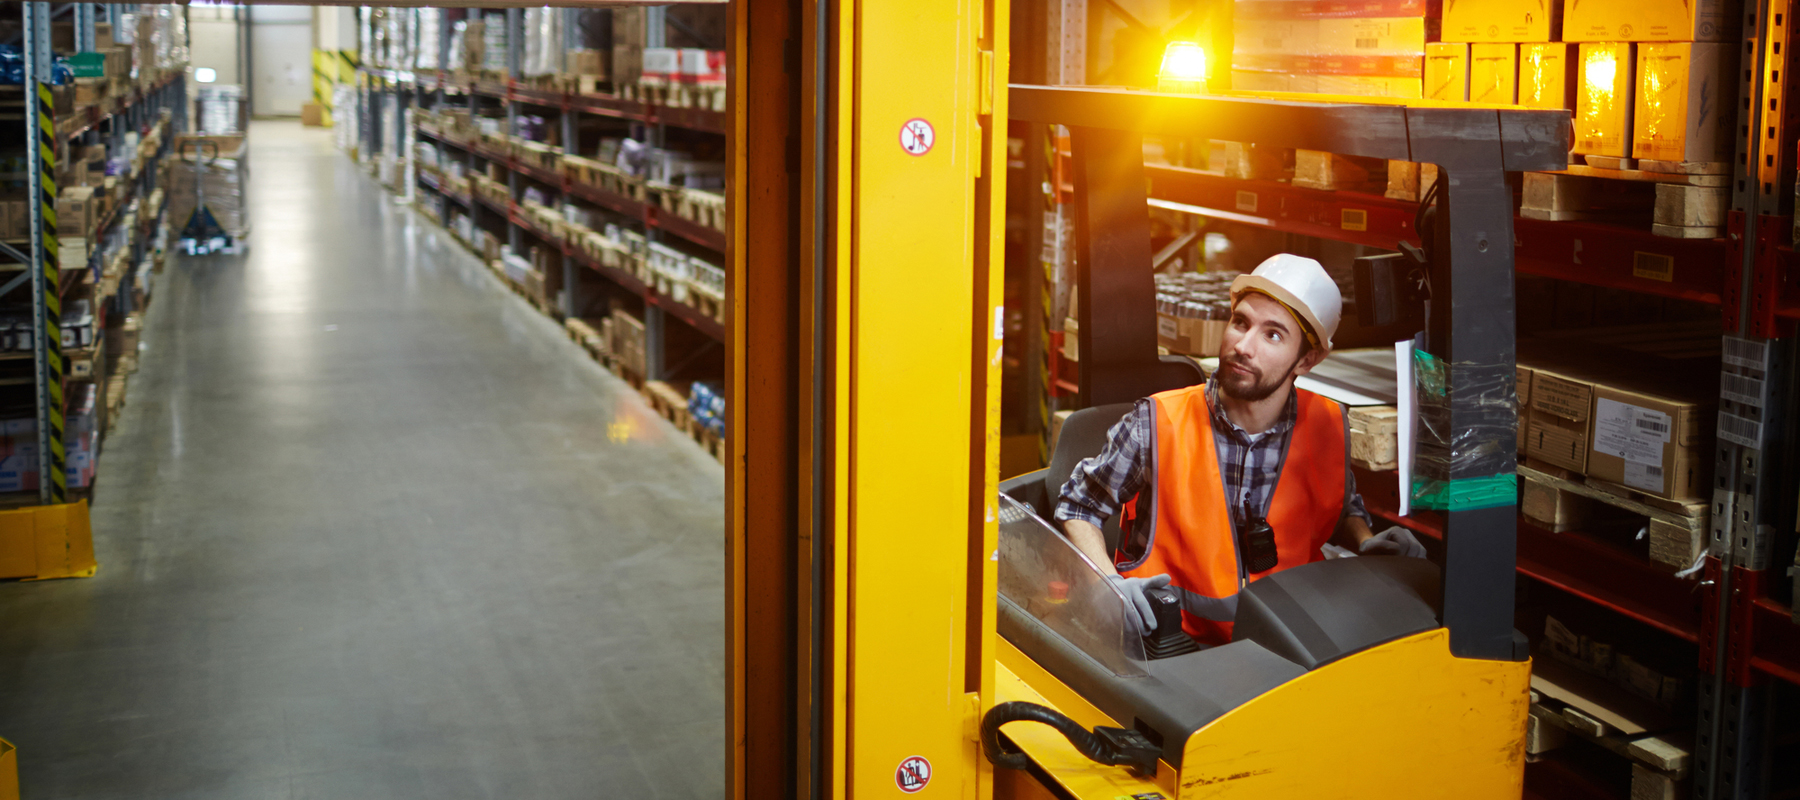 Worker Driving a Reach Forklift in a Warehouse